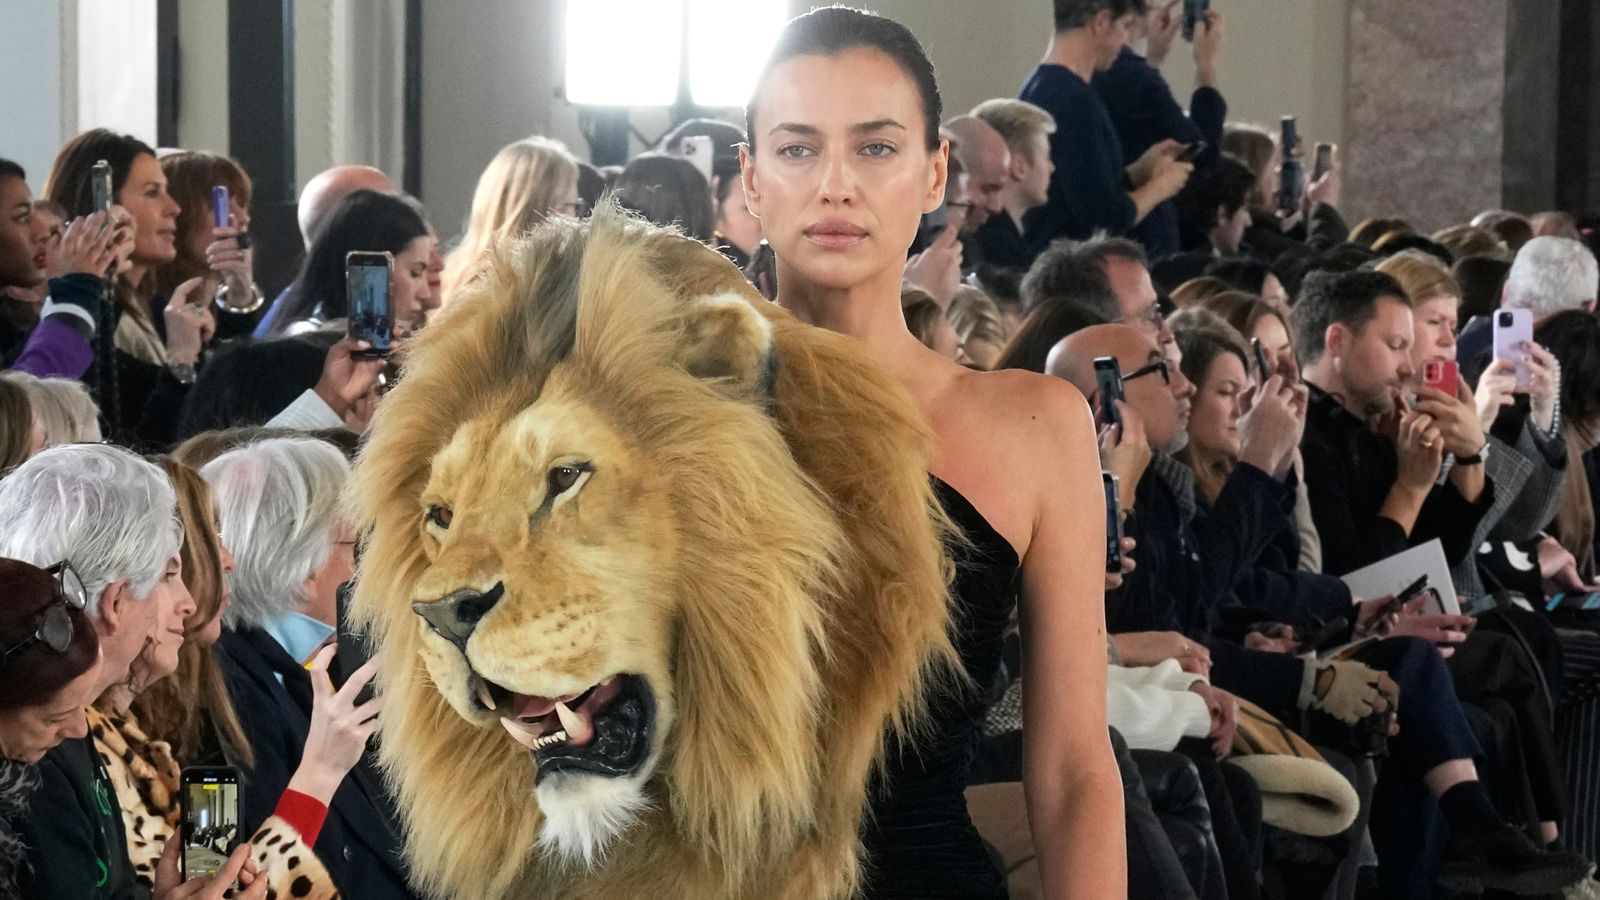 Kylie Jenner lion dress at Paris fashion week defended by Schiaparelli after Carrie Johnson criticism